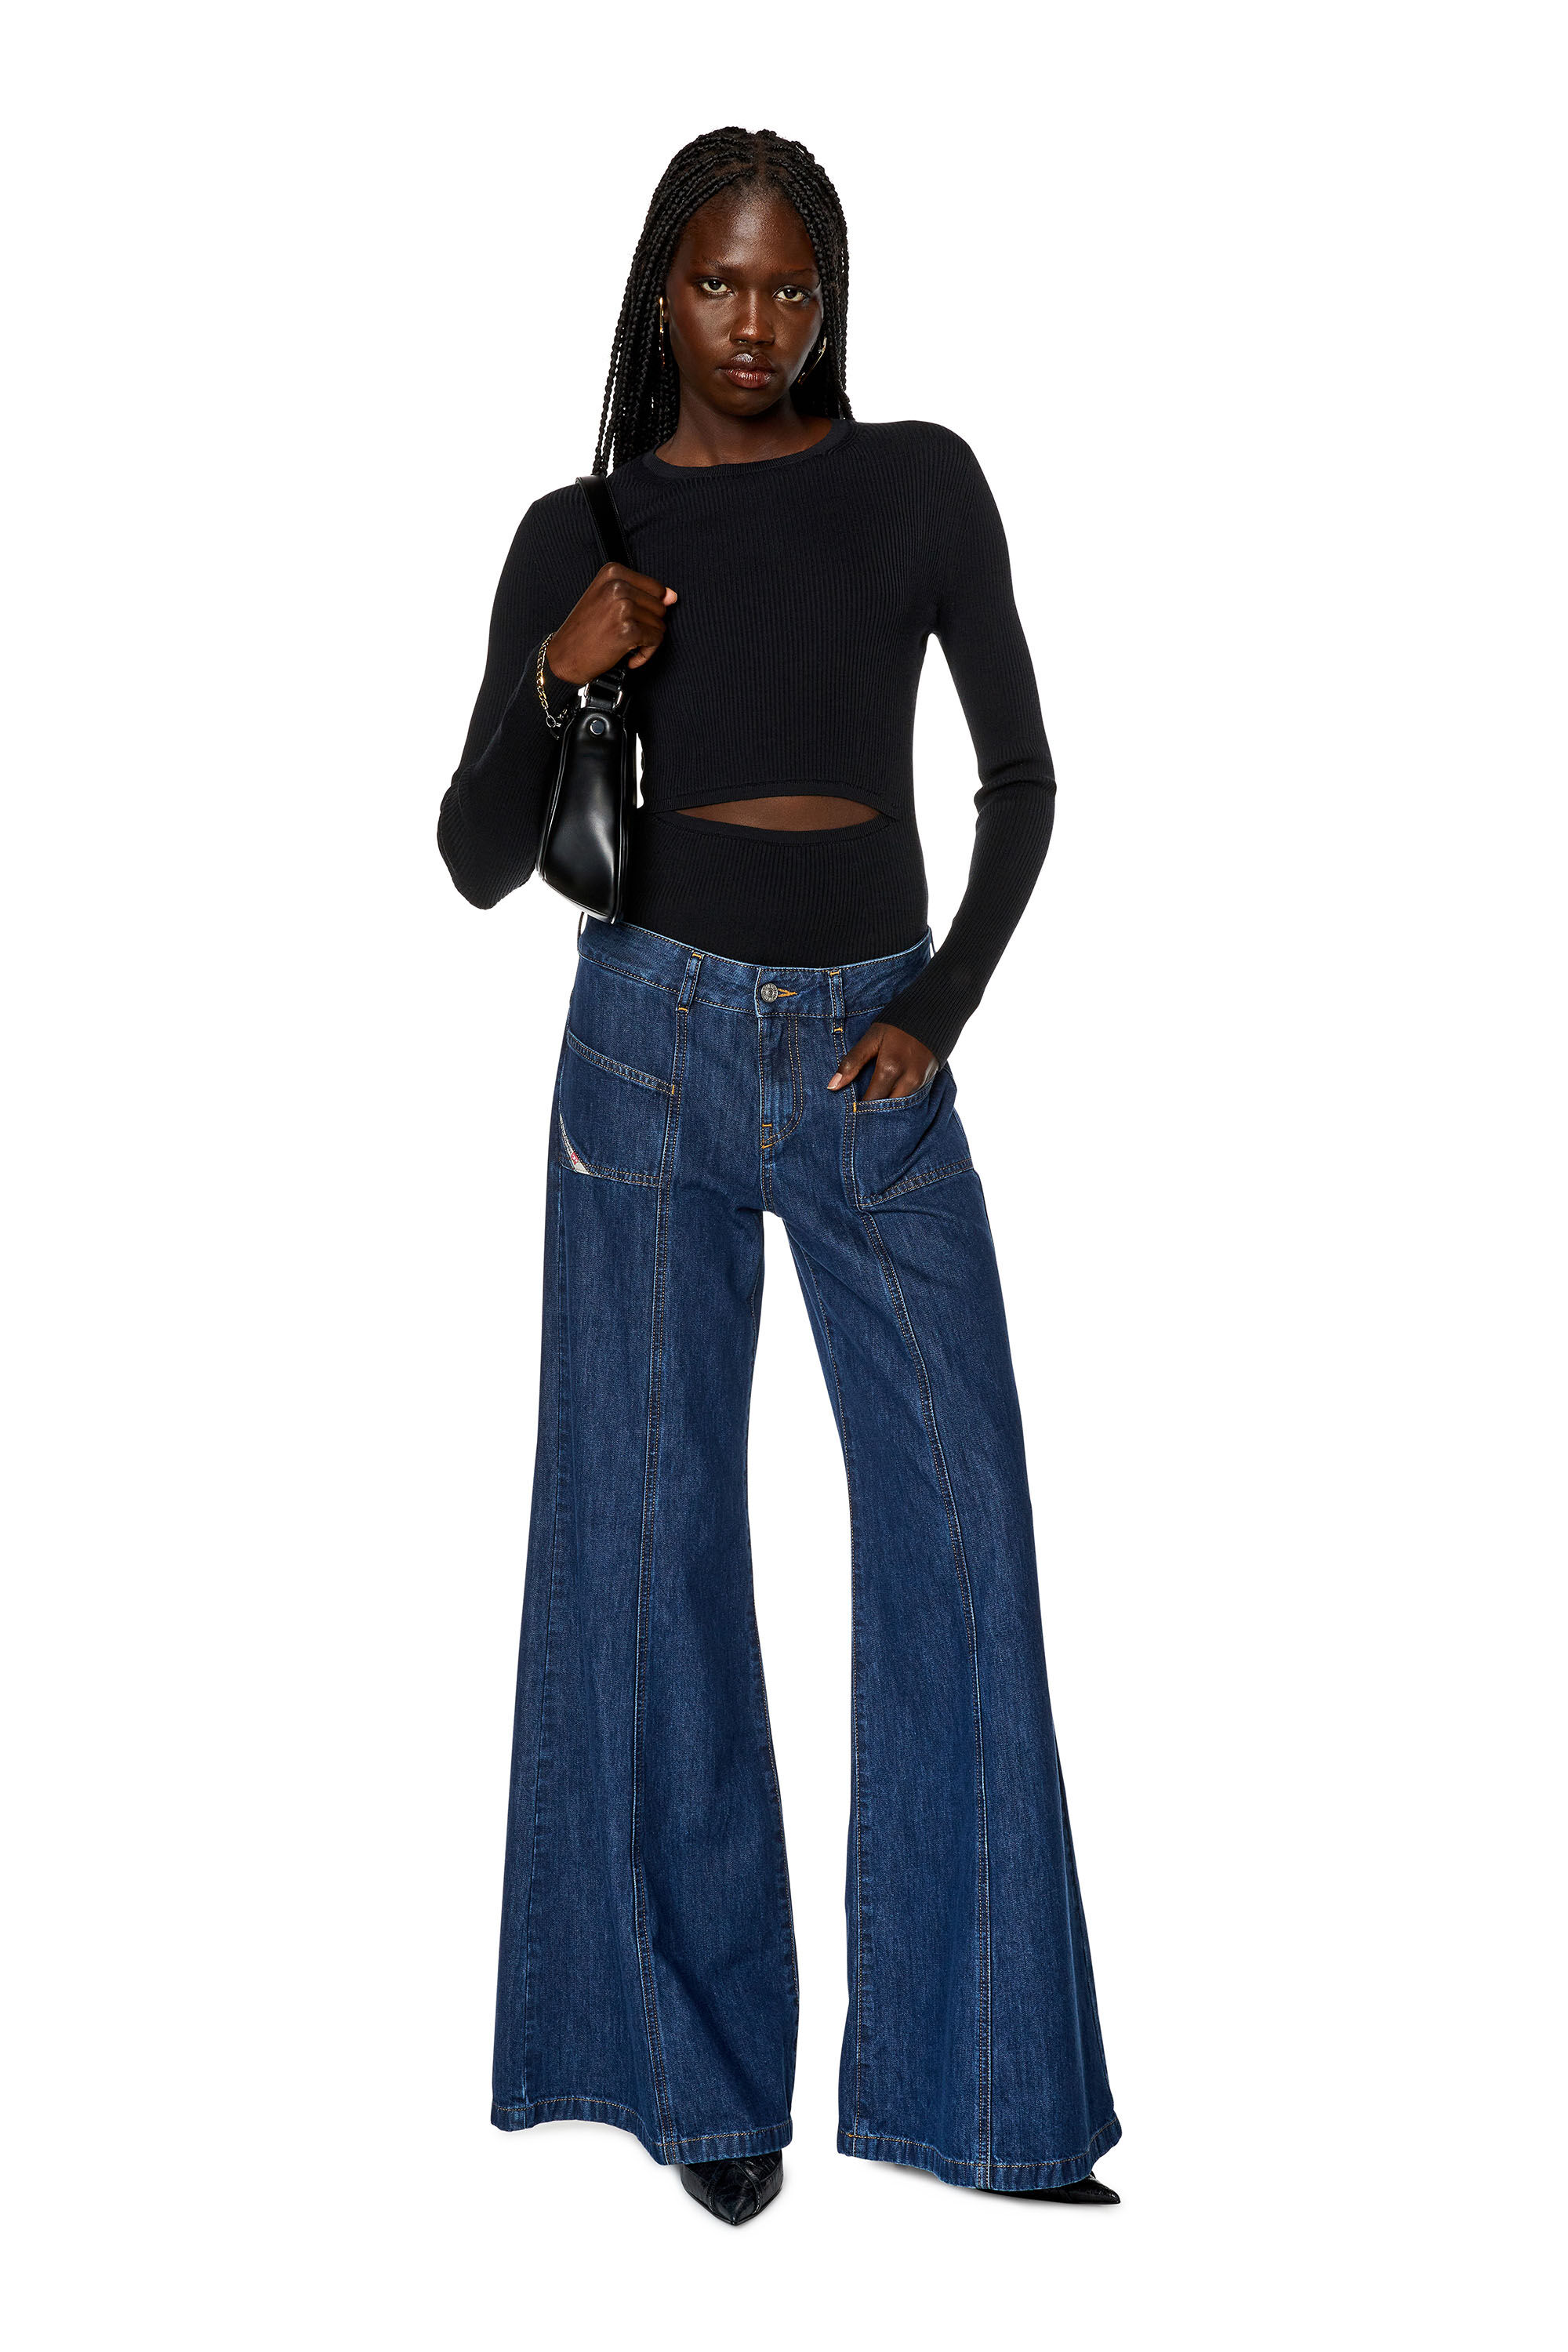 Syiwidii Womens High Waisted Denim Flare High Waisted Flare Jeans With  Super Stretchy Bell Bottom Blue/Black Vintage Streetwear Pants XS 211129  X0920 From Paris_012, $26.58